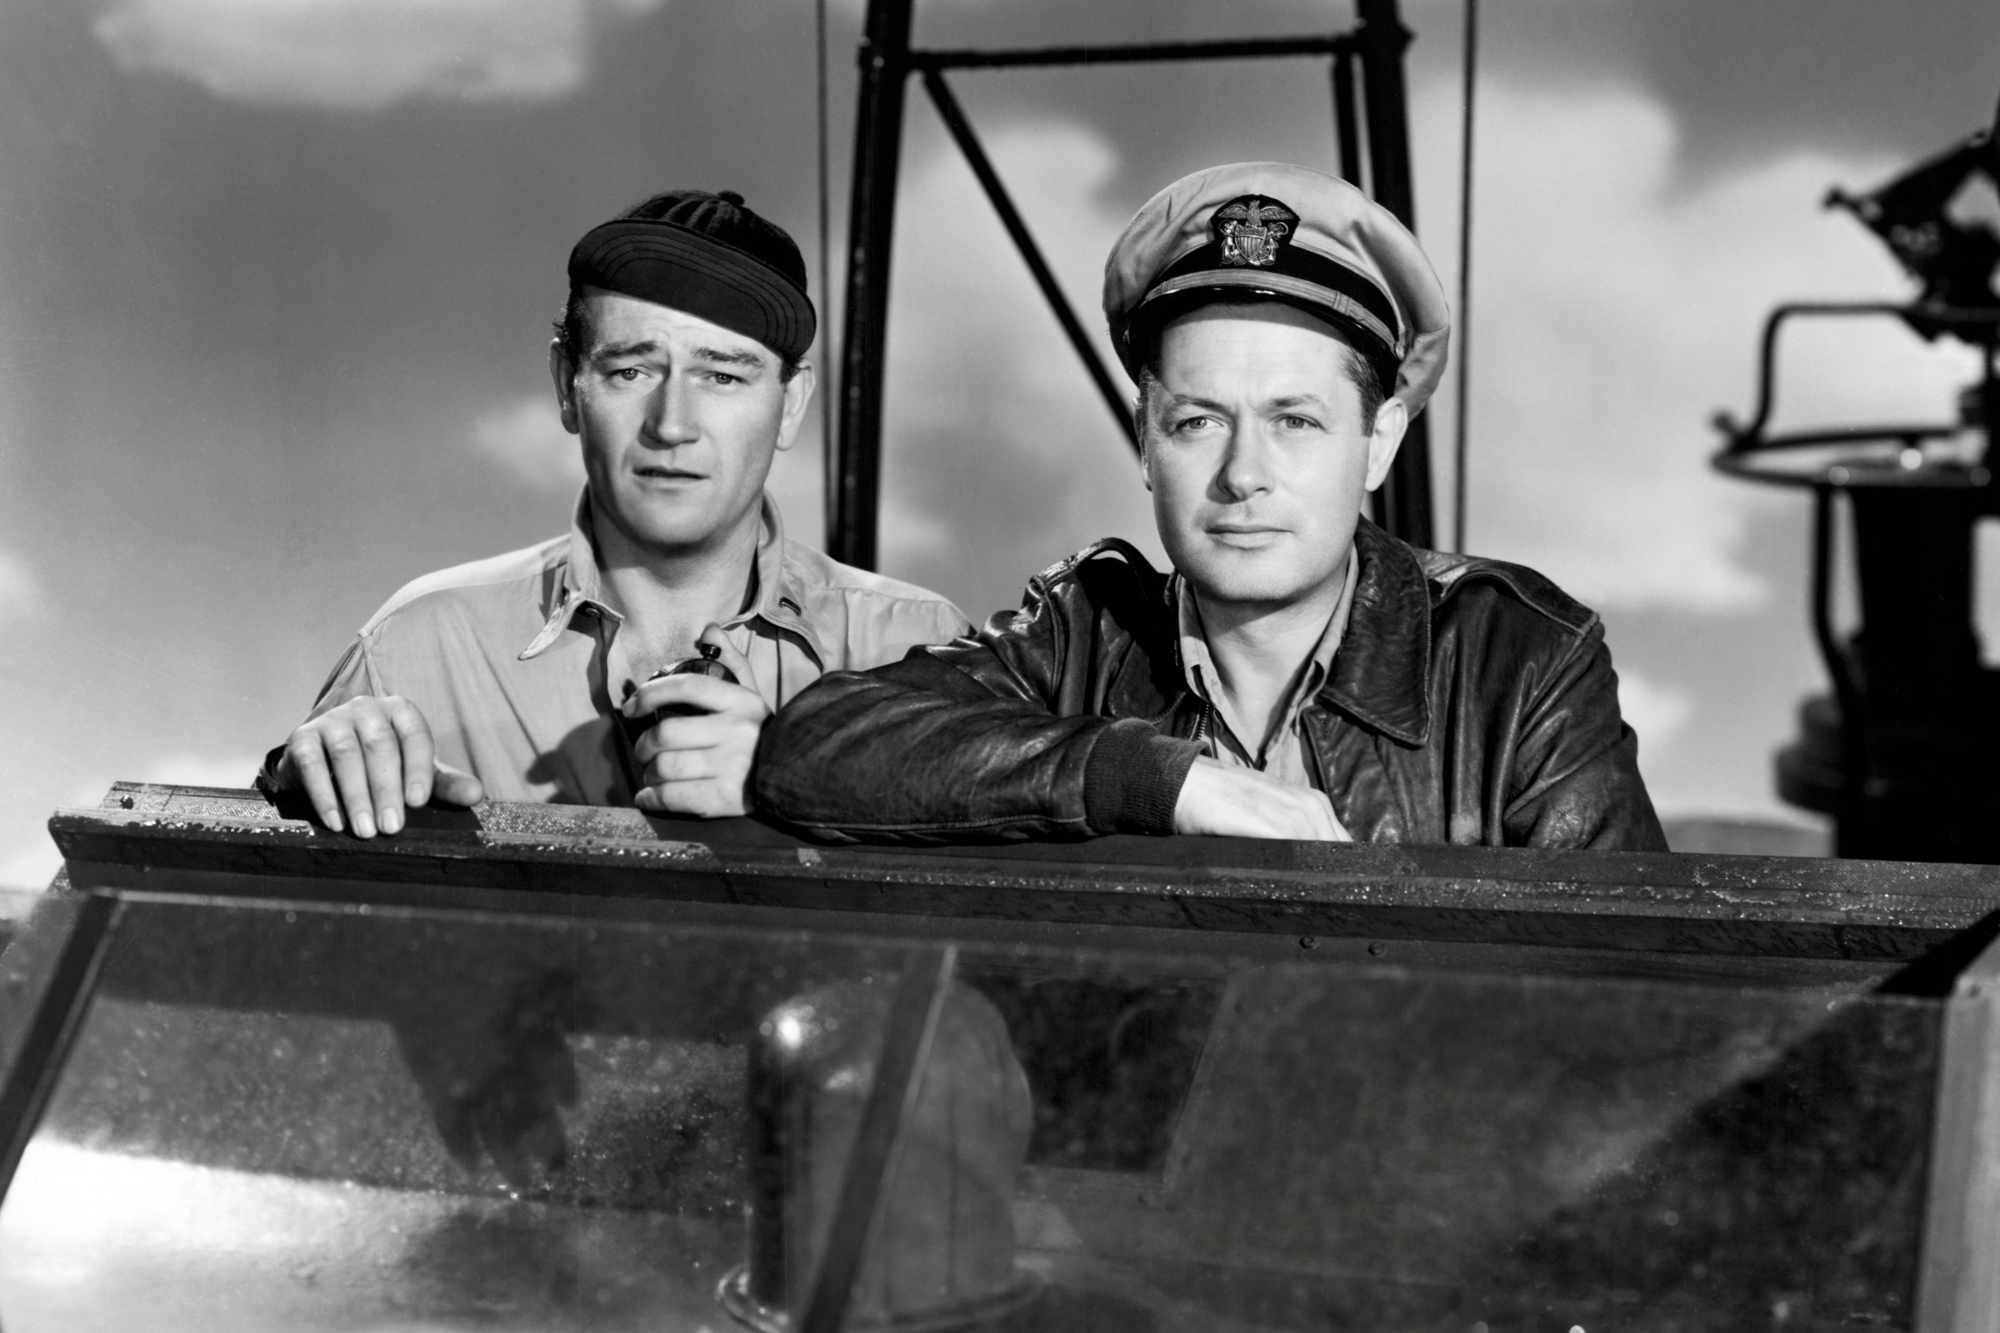 'They Were Expendable' movie stars Robert Montgomery as Lt. John Brickley and John Wayne as Lt. Rusty Ryan in a black-and-white picture wearing Navy uniforms looking serious